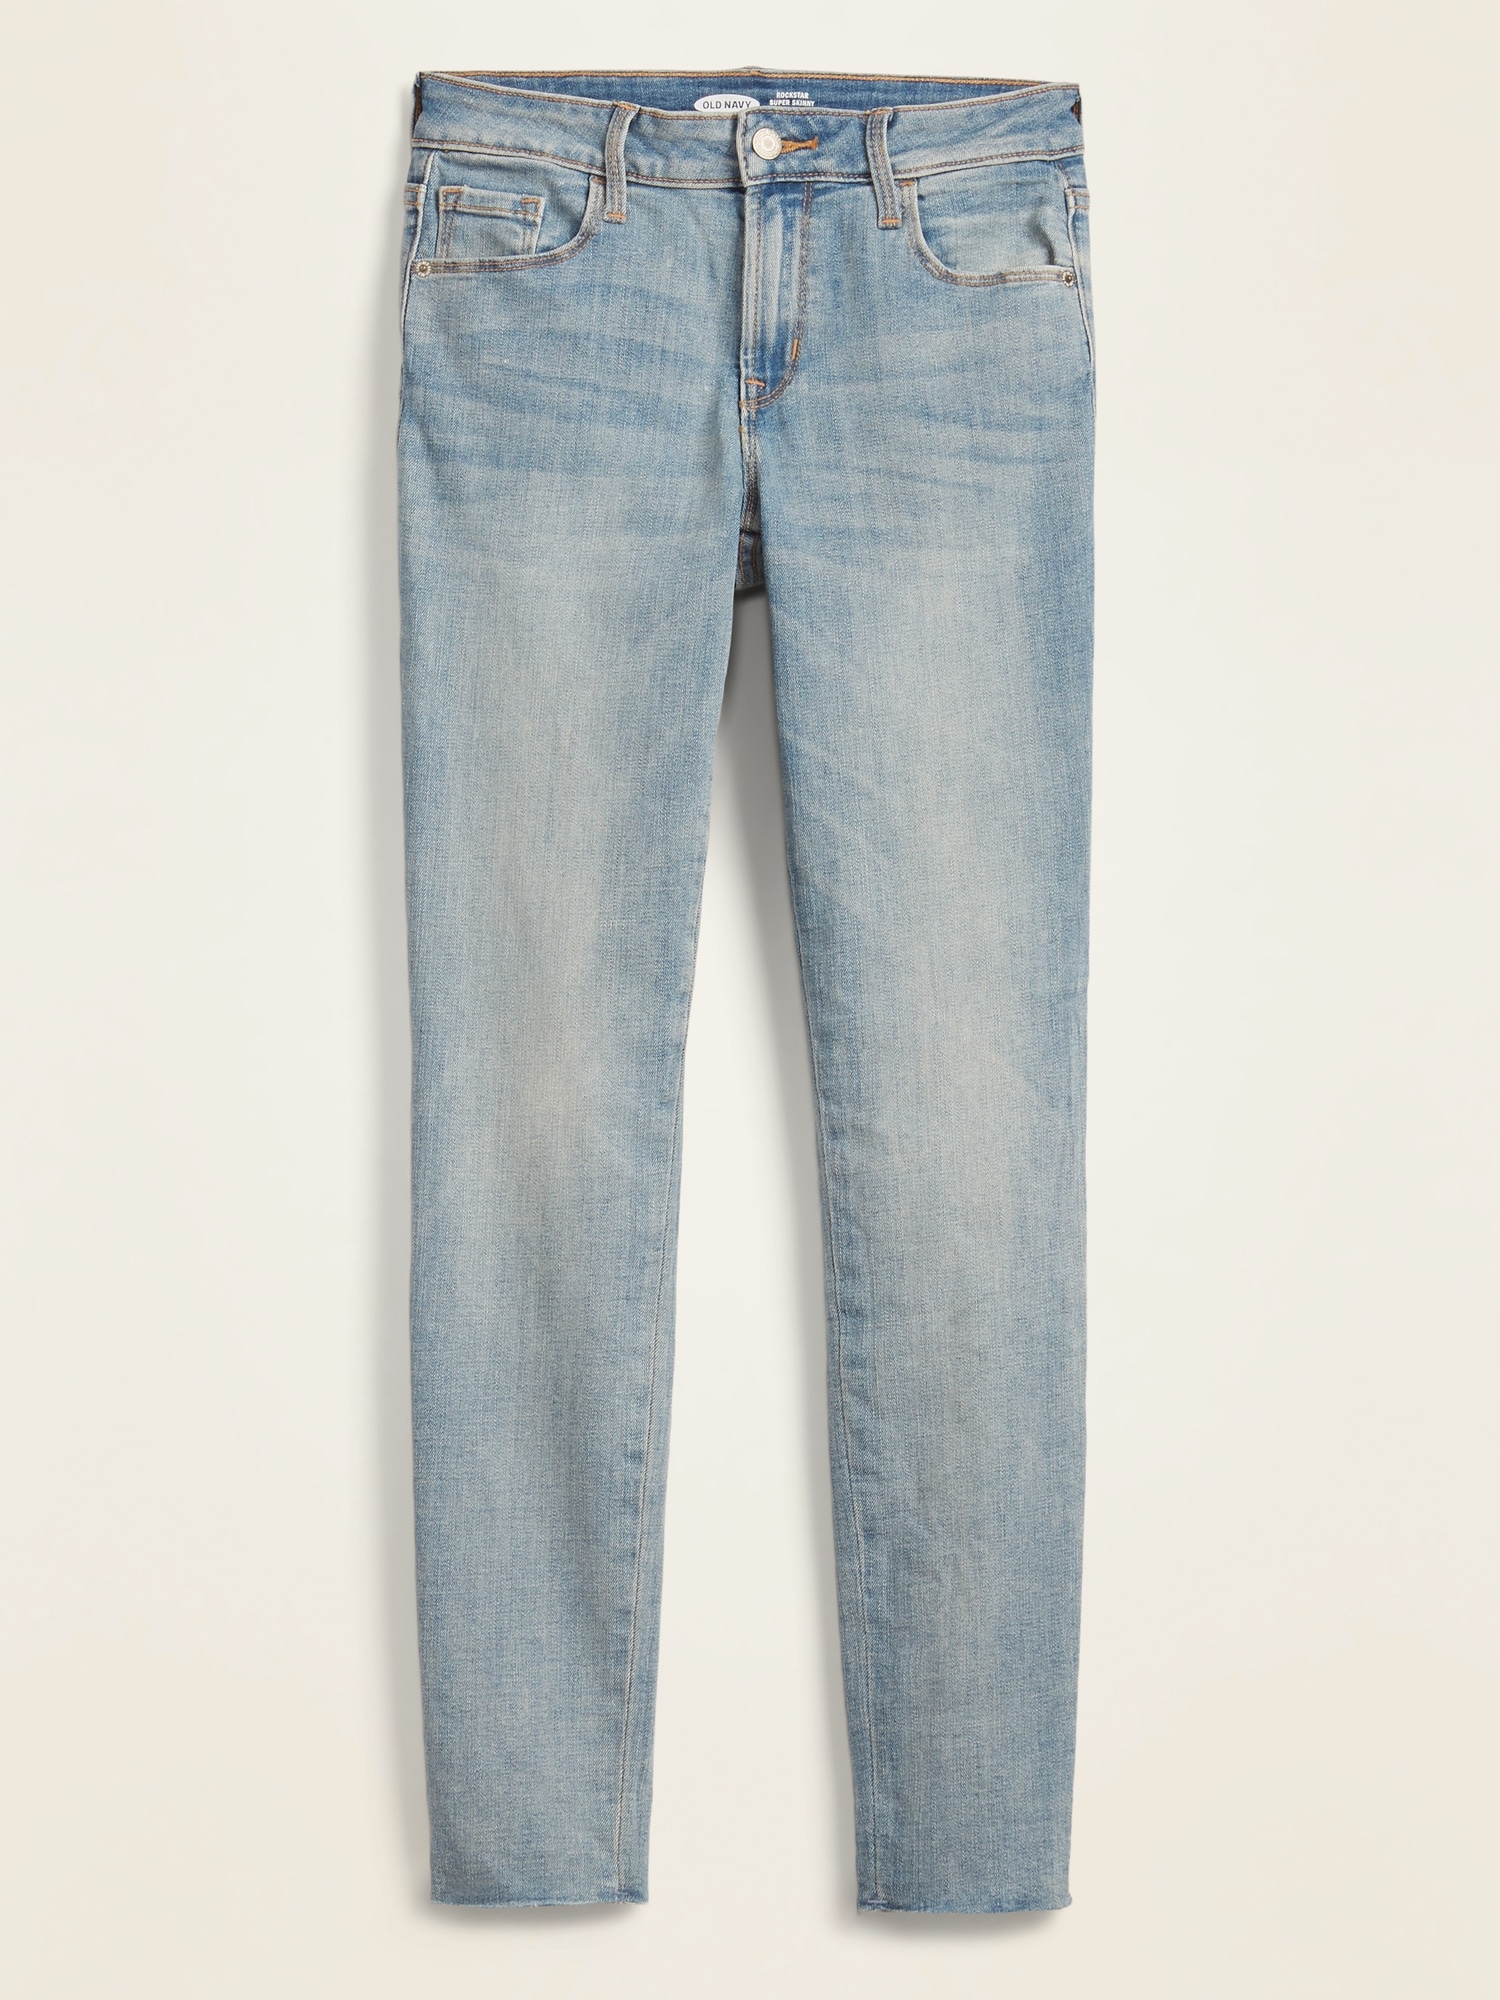 rockstar mid rise jeans old navy